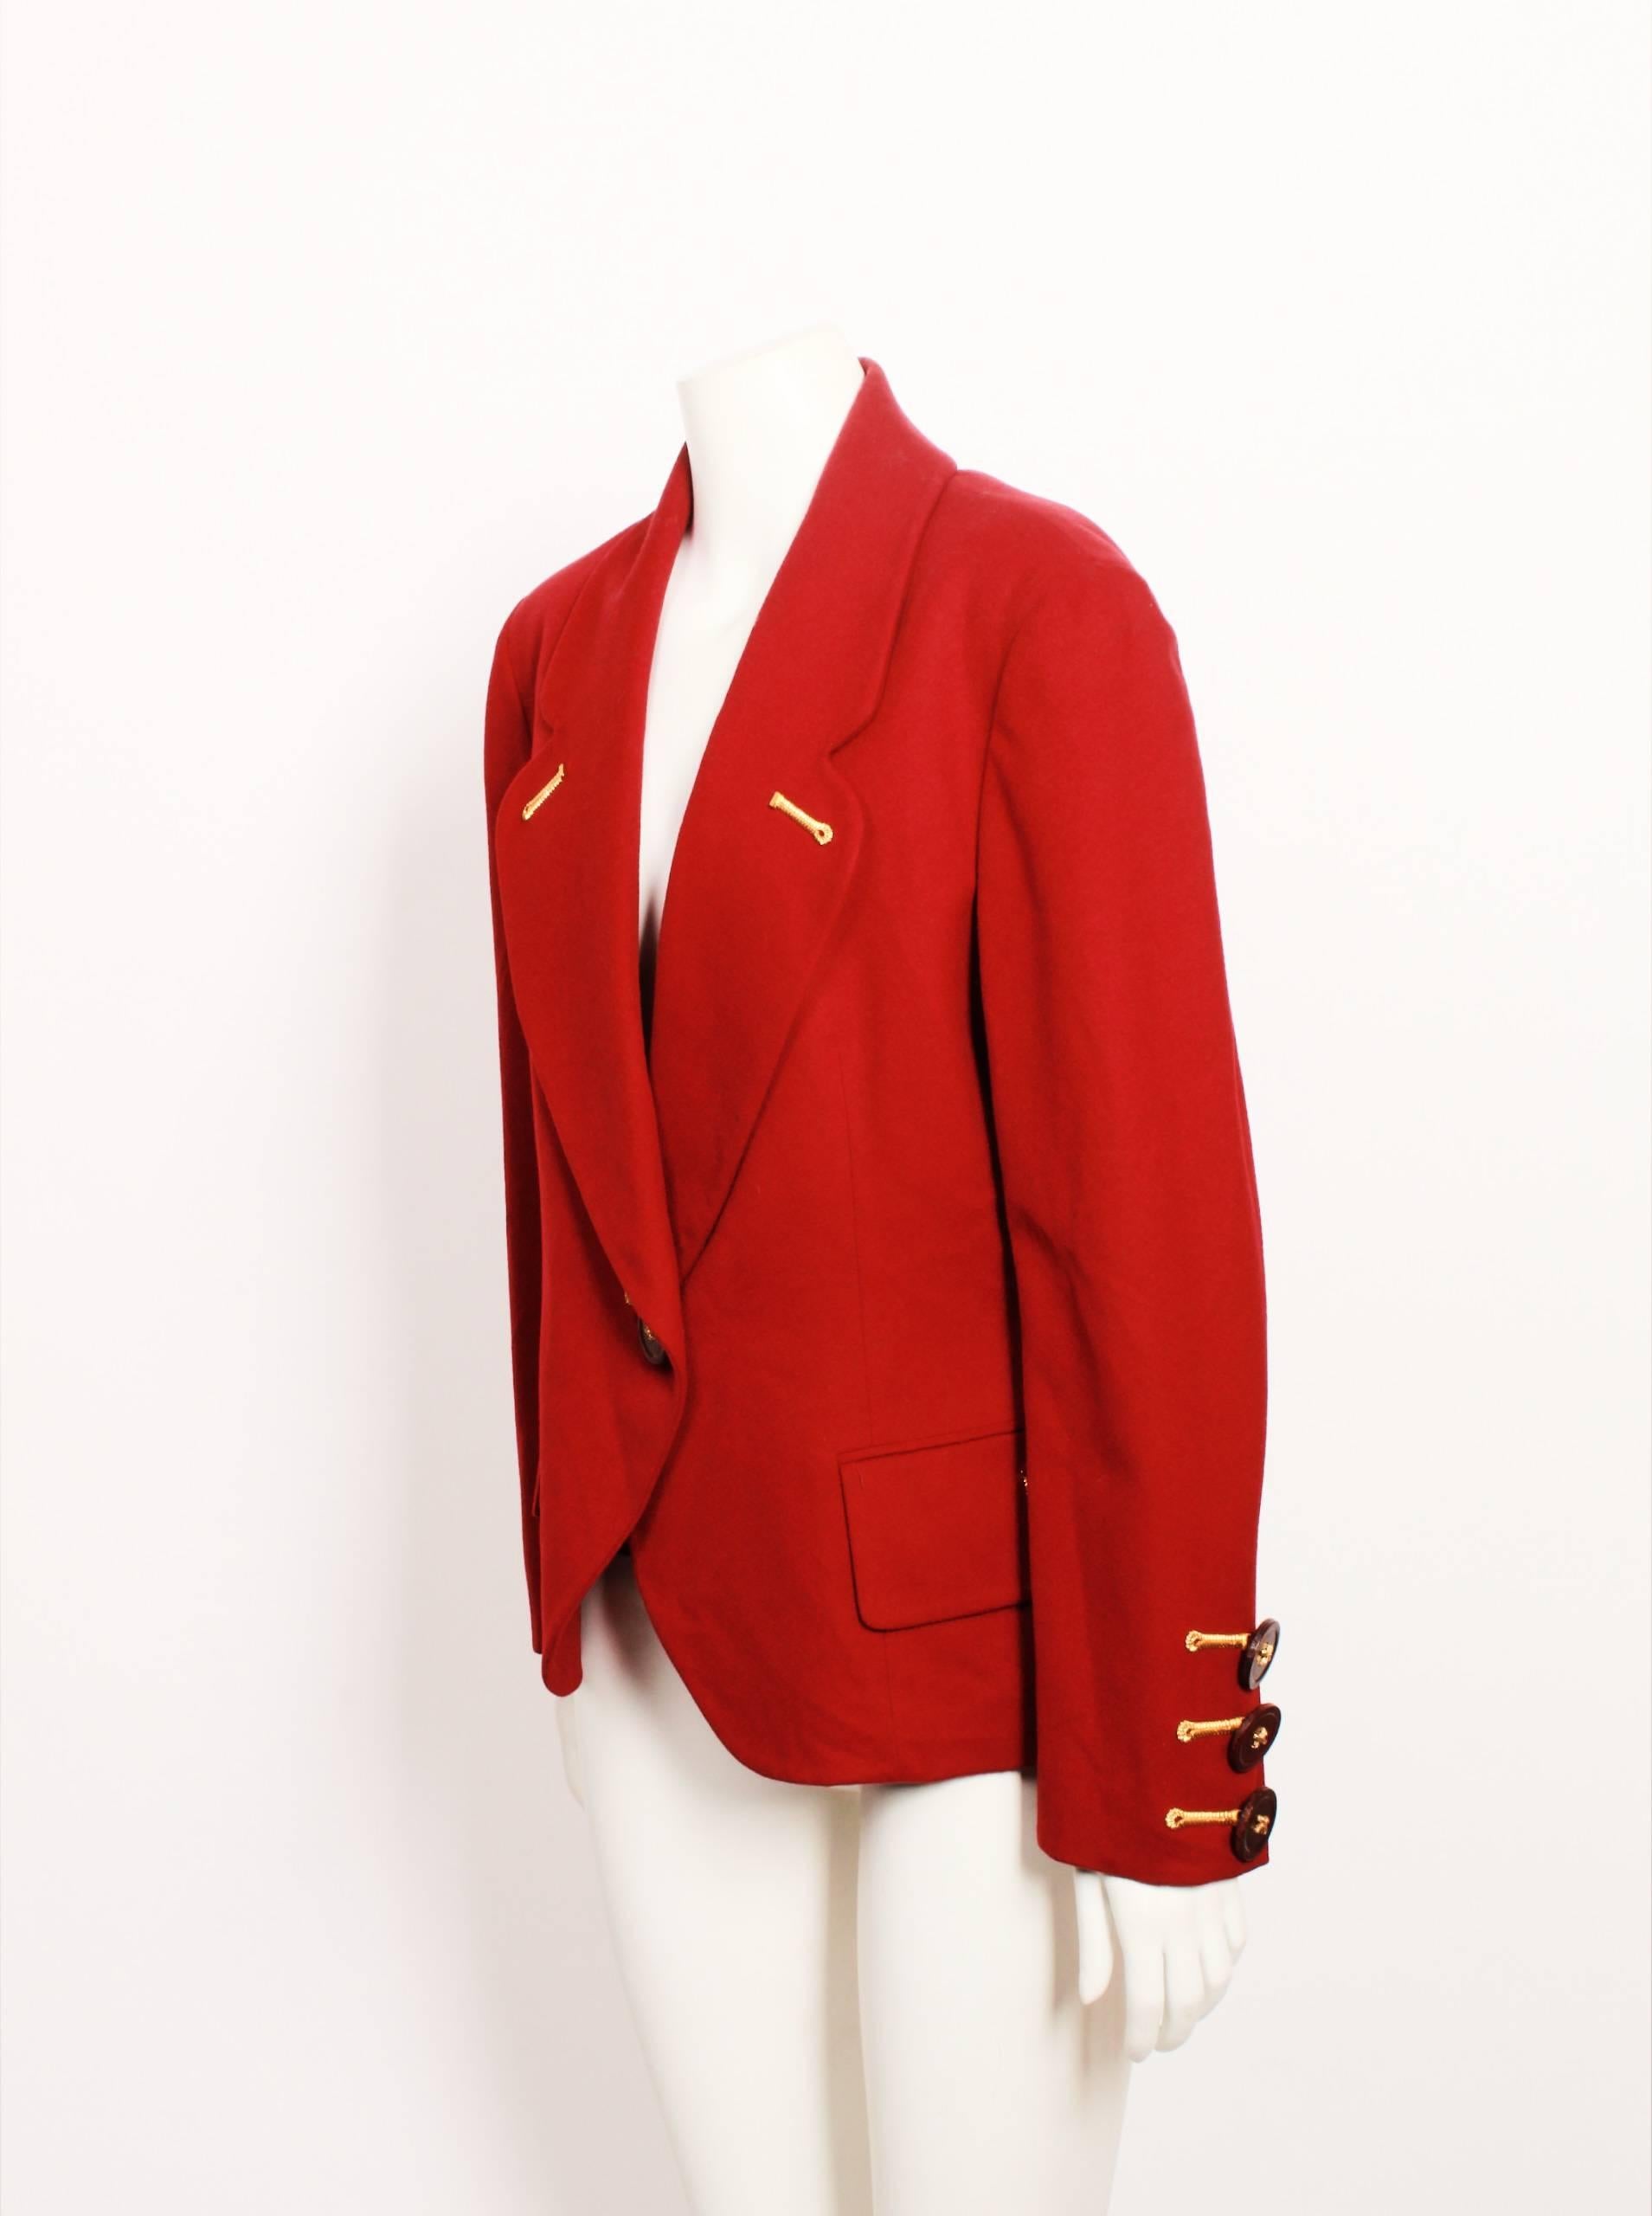 Red Gianfranco Ferre Rust Wool Cashmere Blazer With Gold Embellishment